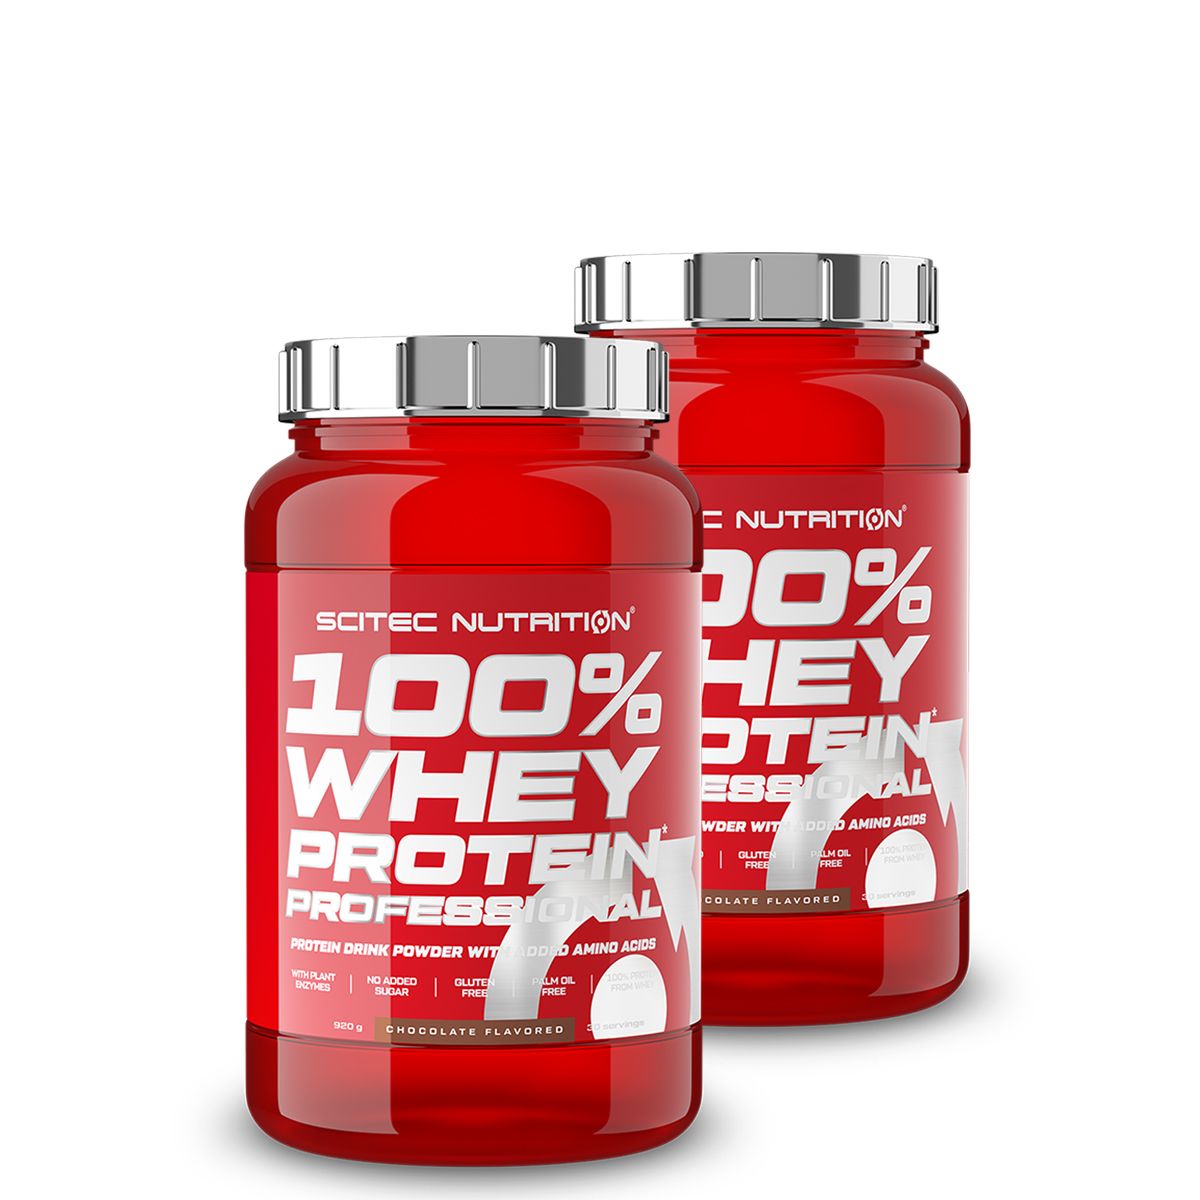 SCITEC NUTRITION - 100% WHEY PROTEIN PROFESSIONAL - 2 x 920 G